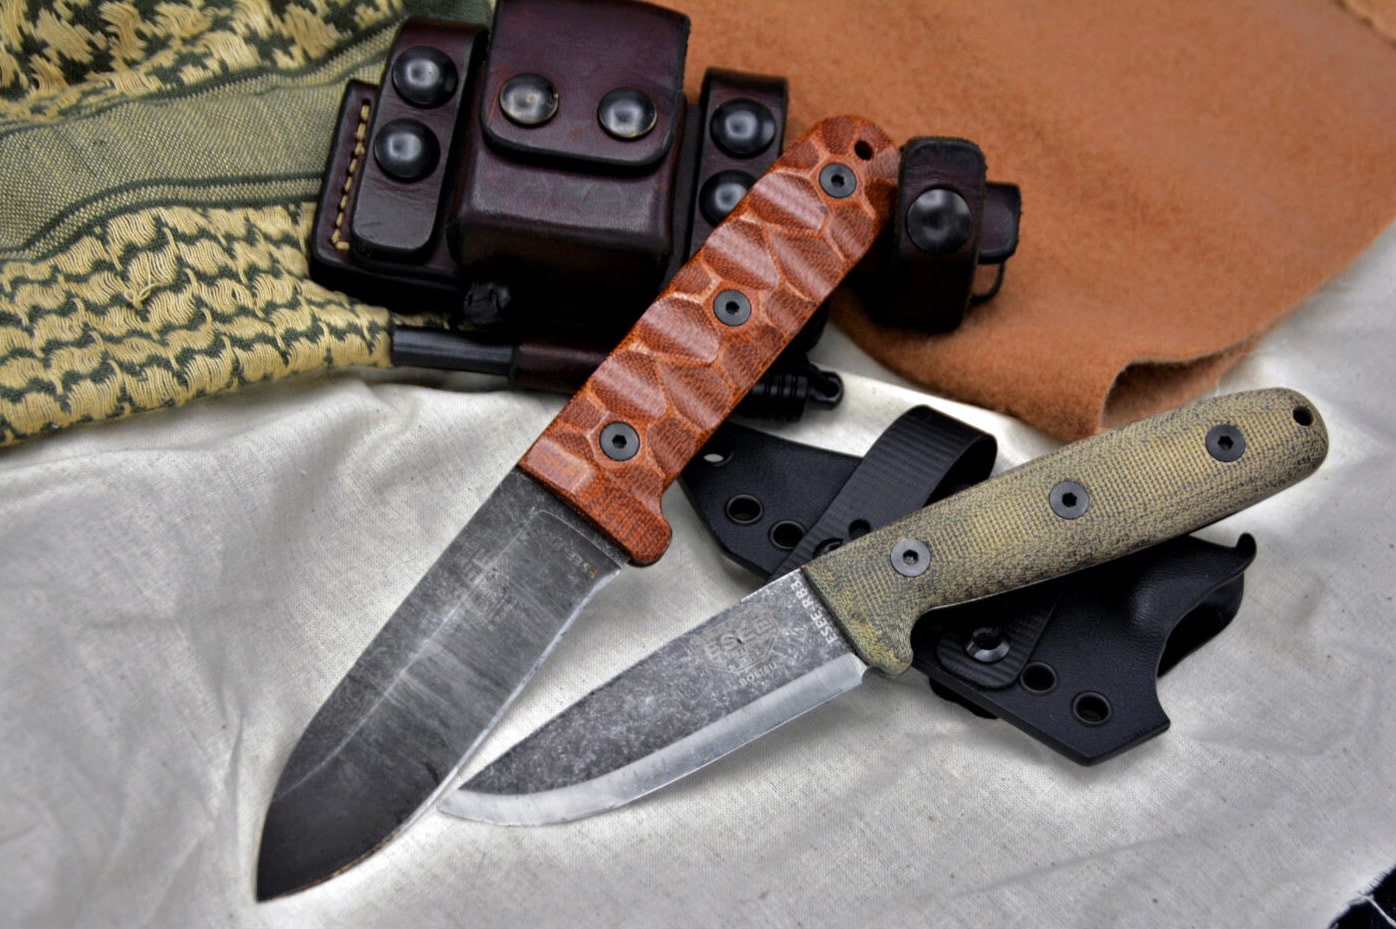 ESEE knives on a table next to sheaths